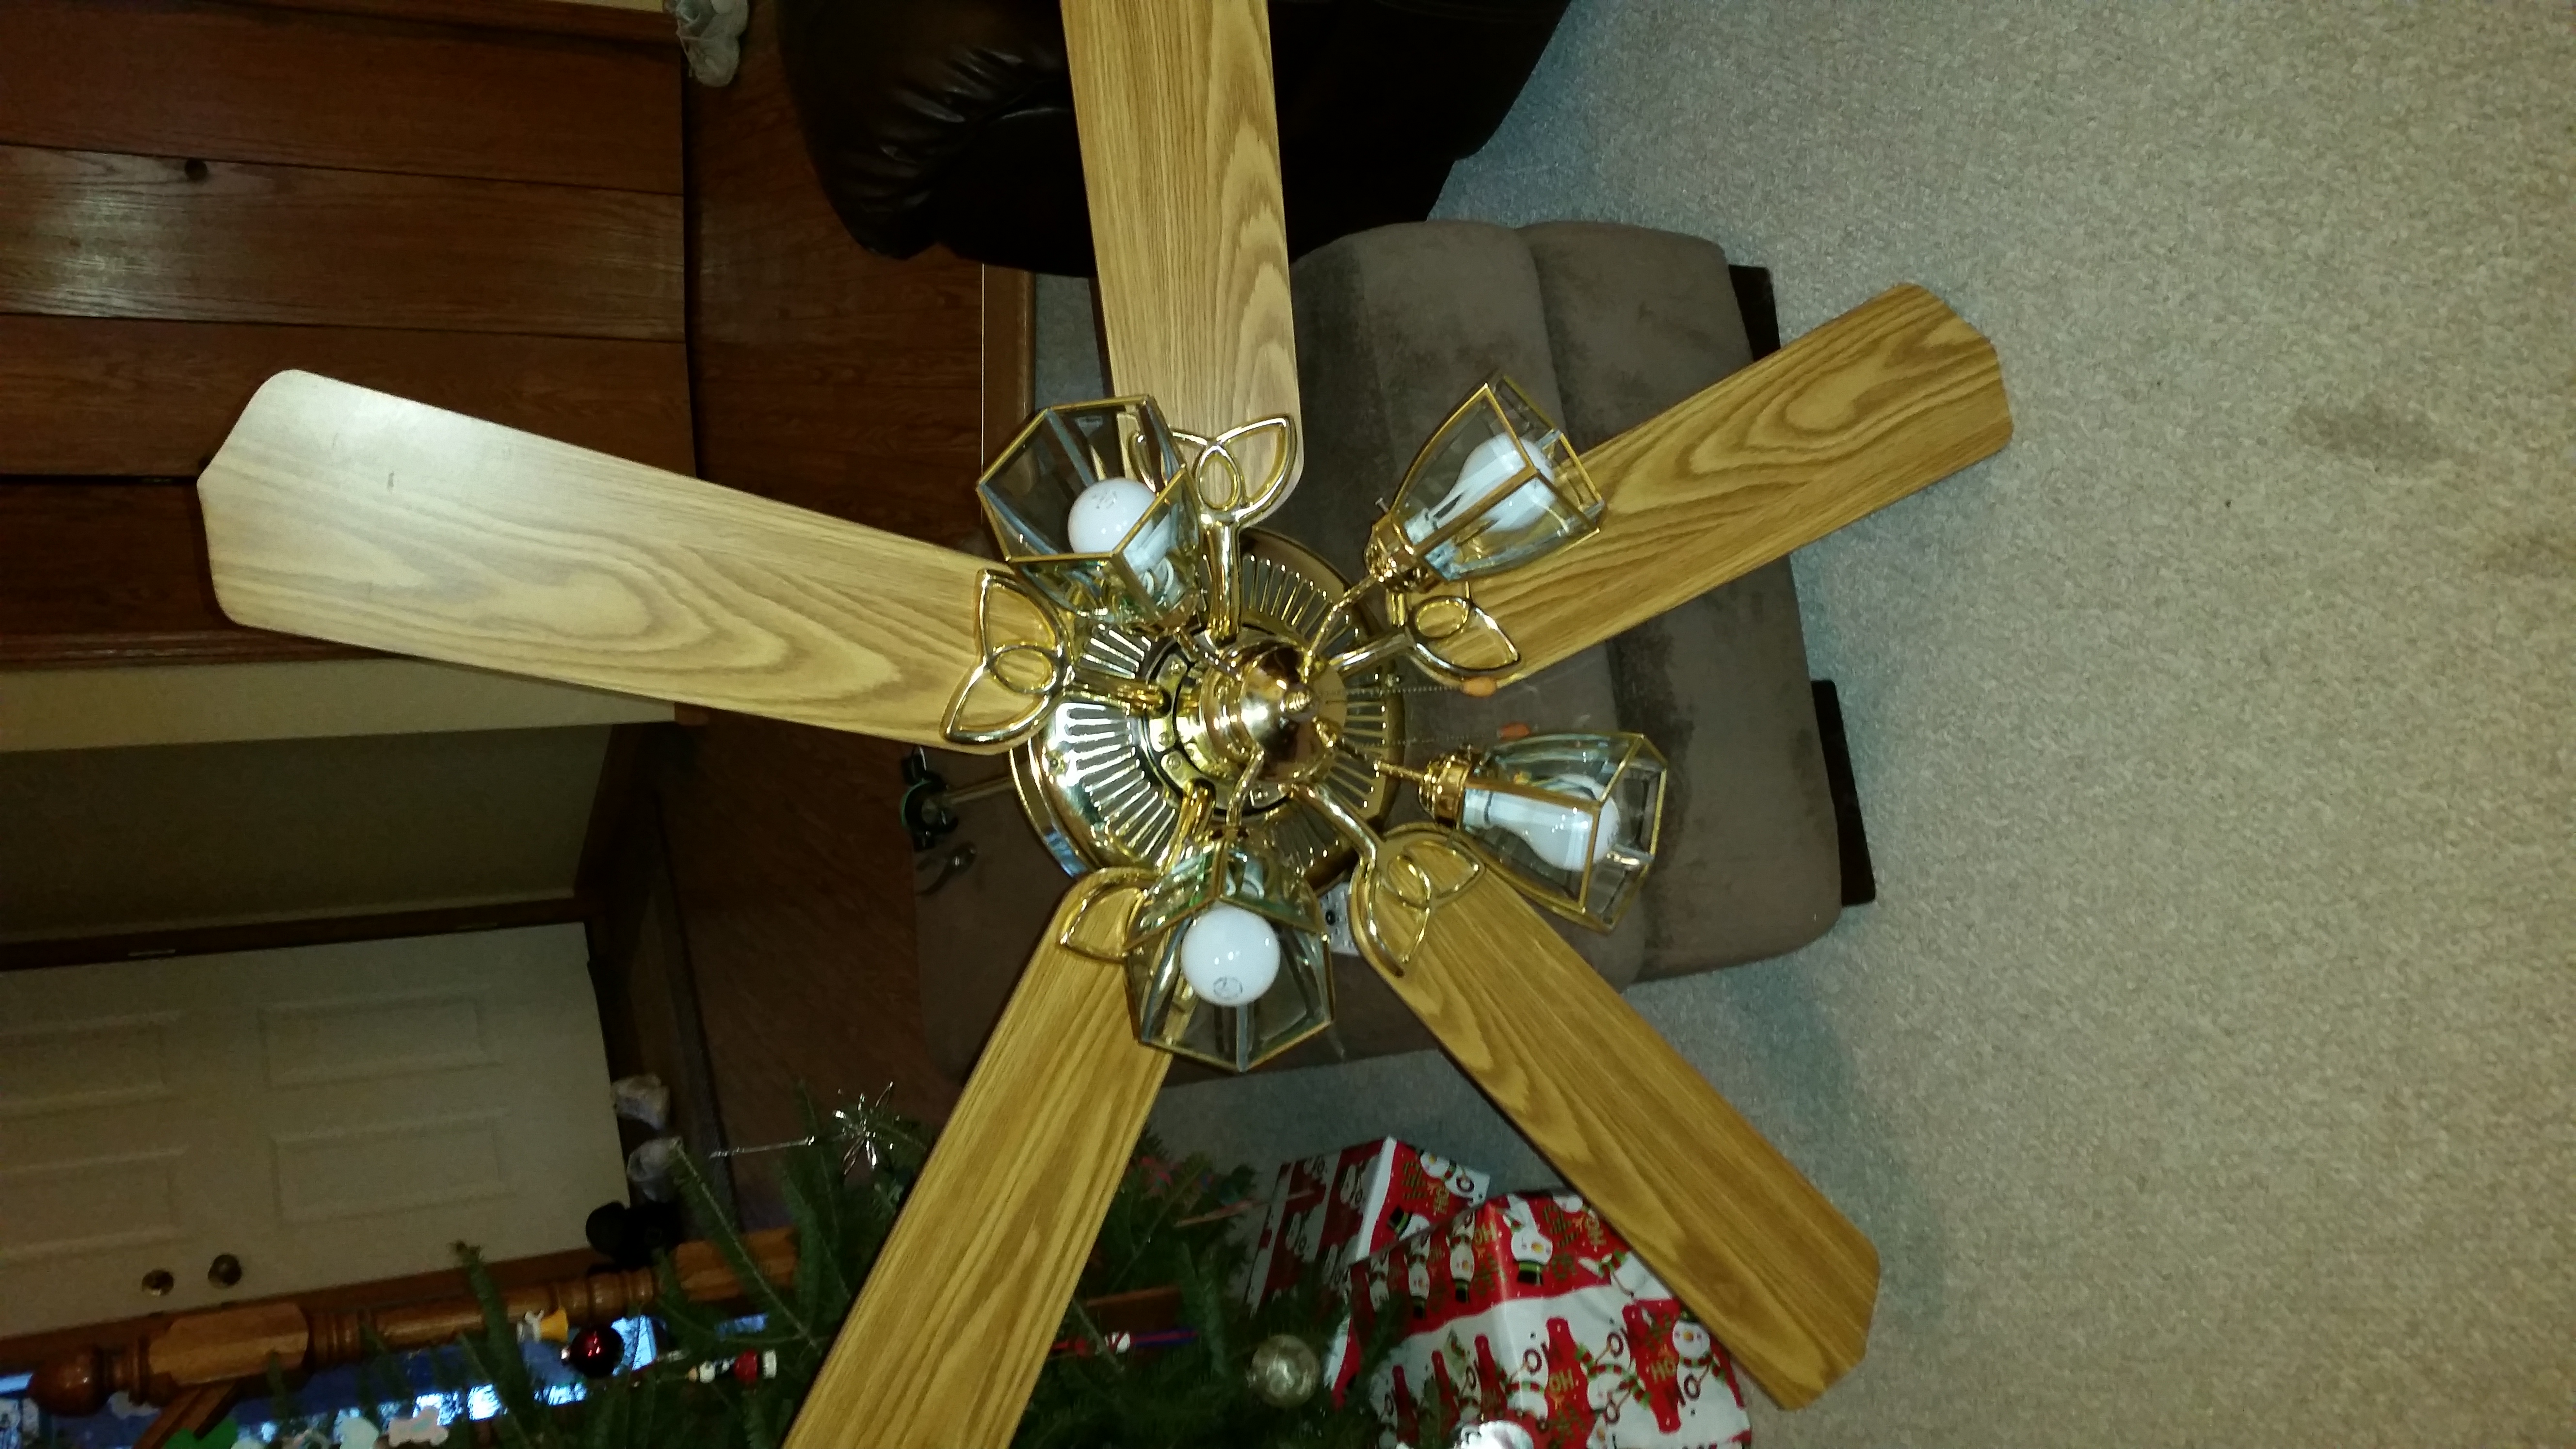 Matching lights, chandelier and ceiling fan for sale - Classified Ads